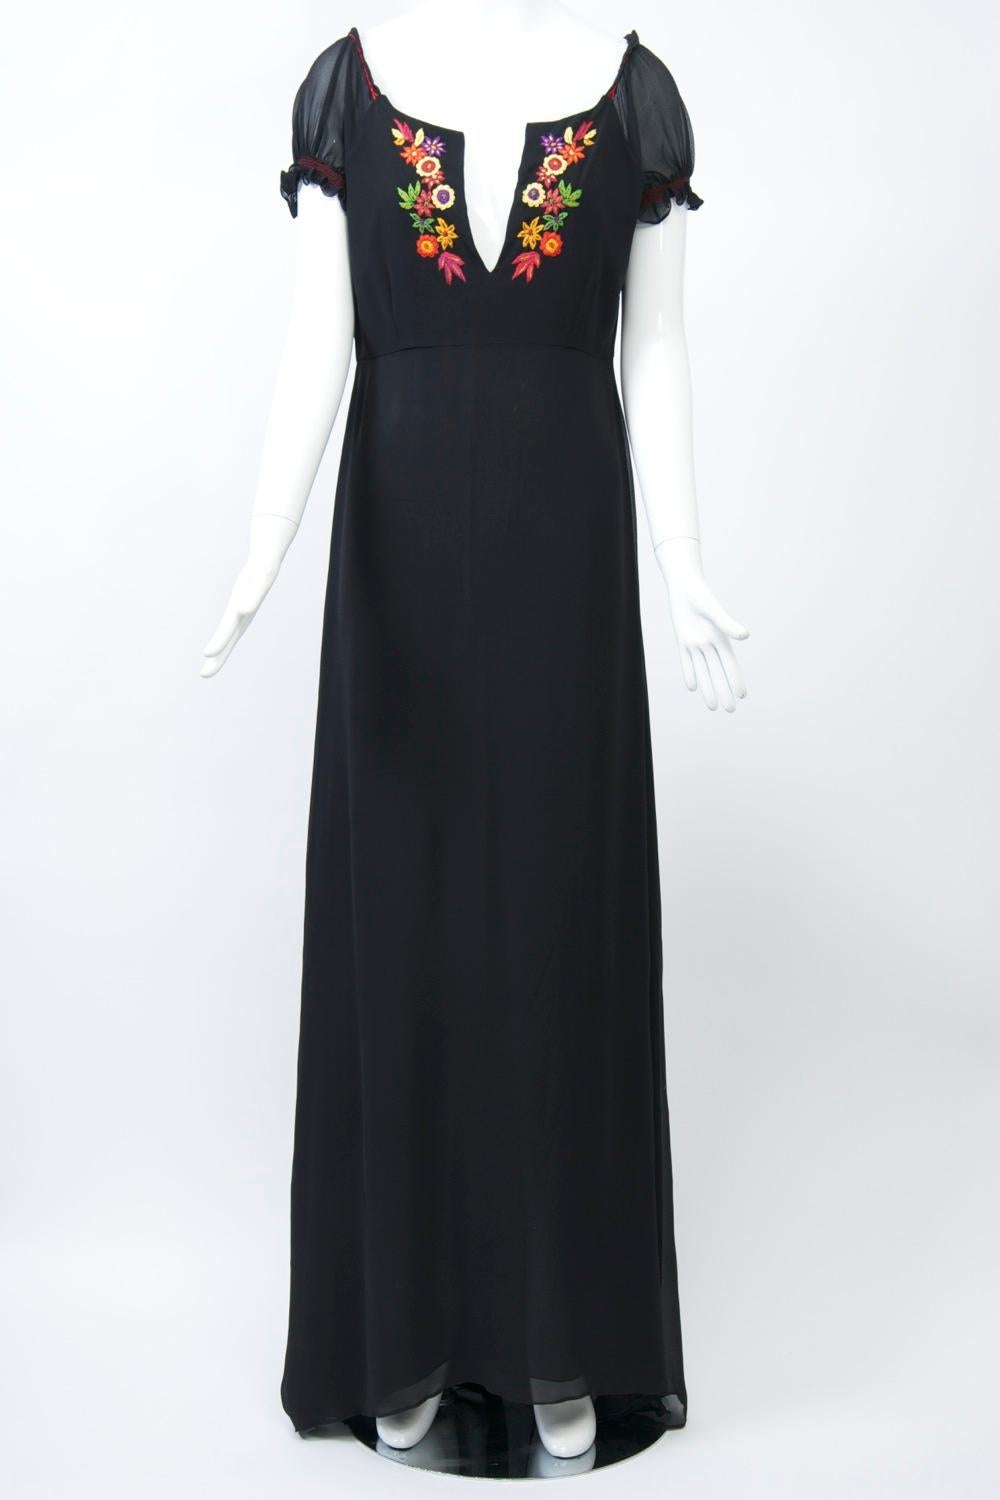 Long dress in black silk featuring ethnic multi-colored embroidery along the low-slit, scoop neckline. The sheer cap sleeves and shoulders are trimmed with red stitching. High waistline. Approximate size M.